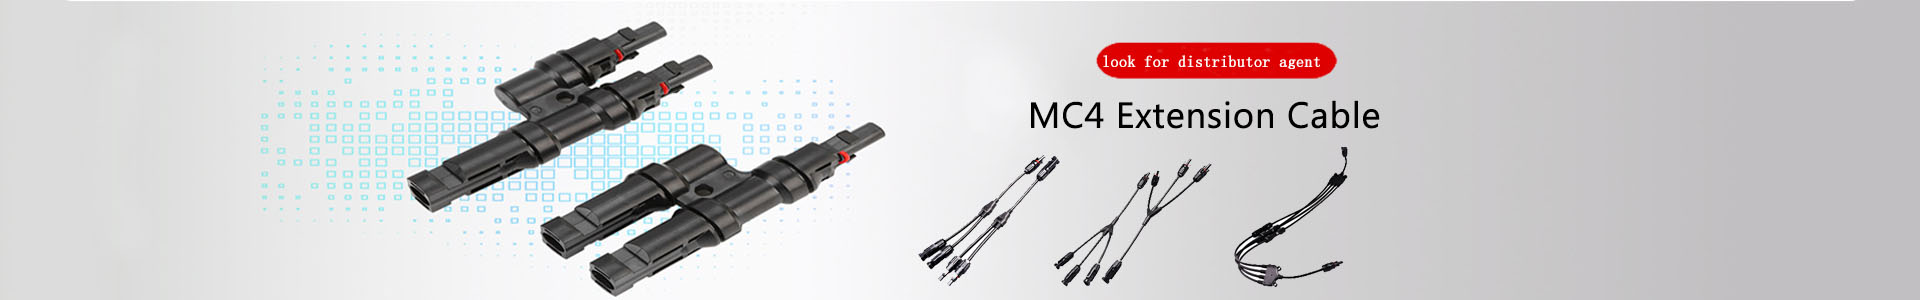 Wodonga 150MW Solar Farm | Handwe Group-Solar | solar connector,solar branch connector,diode fuse connector,MC4 extnsion cable,H1Z2Z2 solar cable, UL4703 solar cable | Leading manufacturer and supplier of solar pv cables and connectors